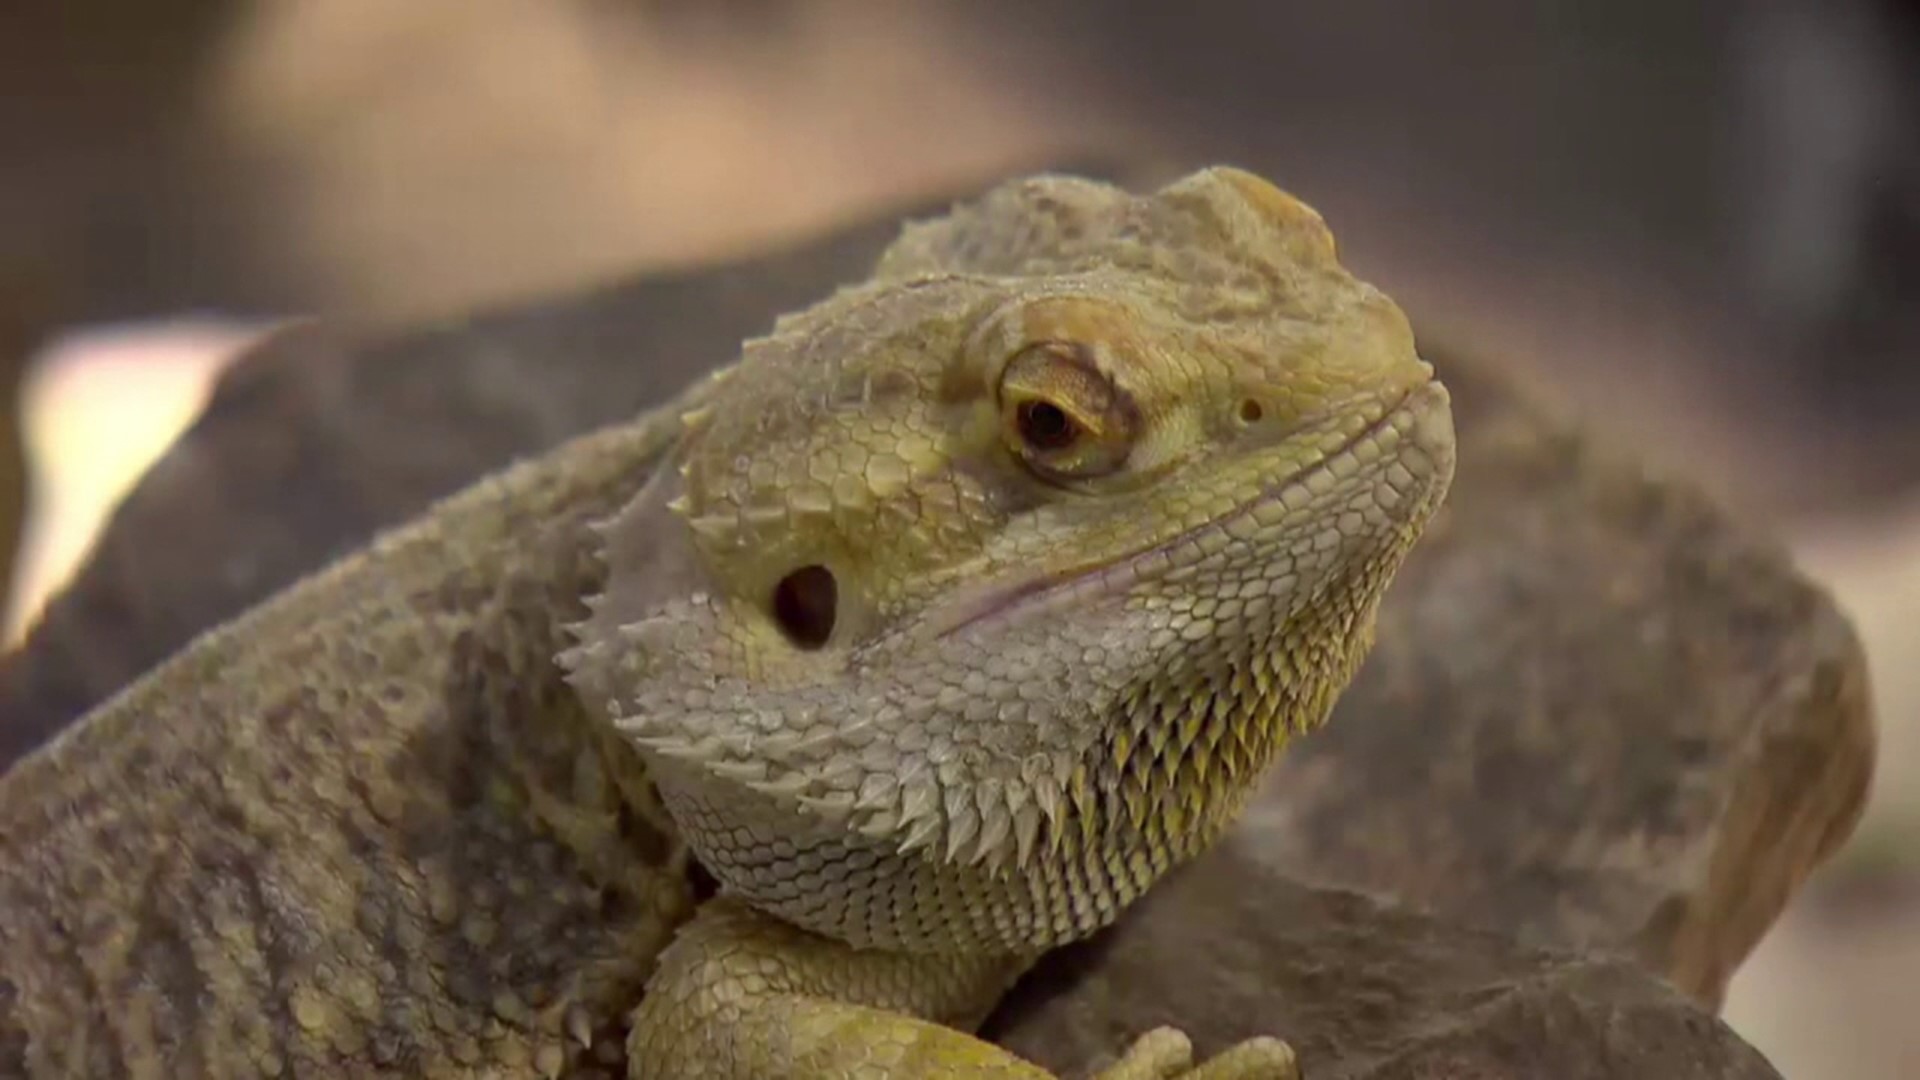 A newly released study from the Centers for Disease Control and Prevention has linked a rare strain of salmonella to bearded dragons.